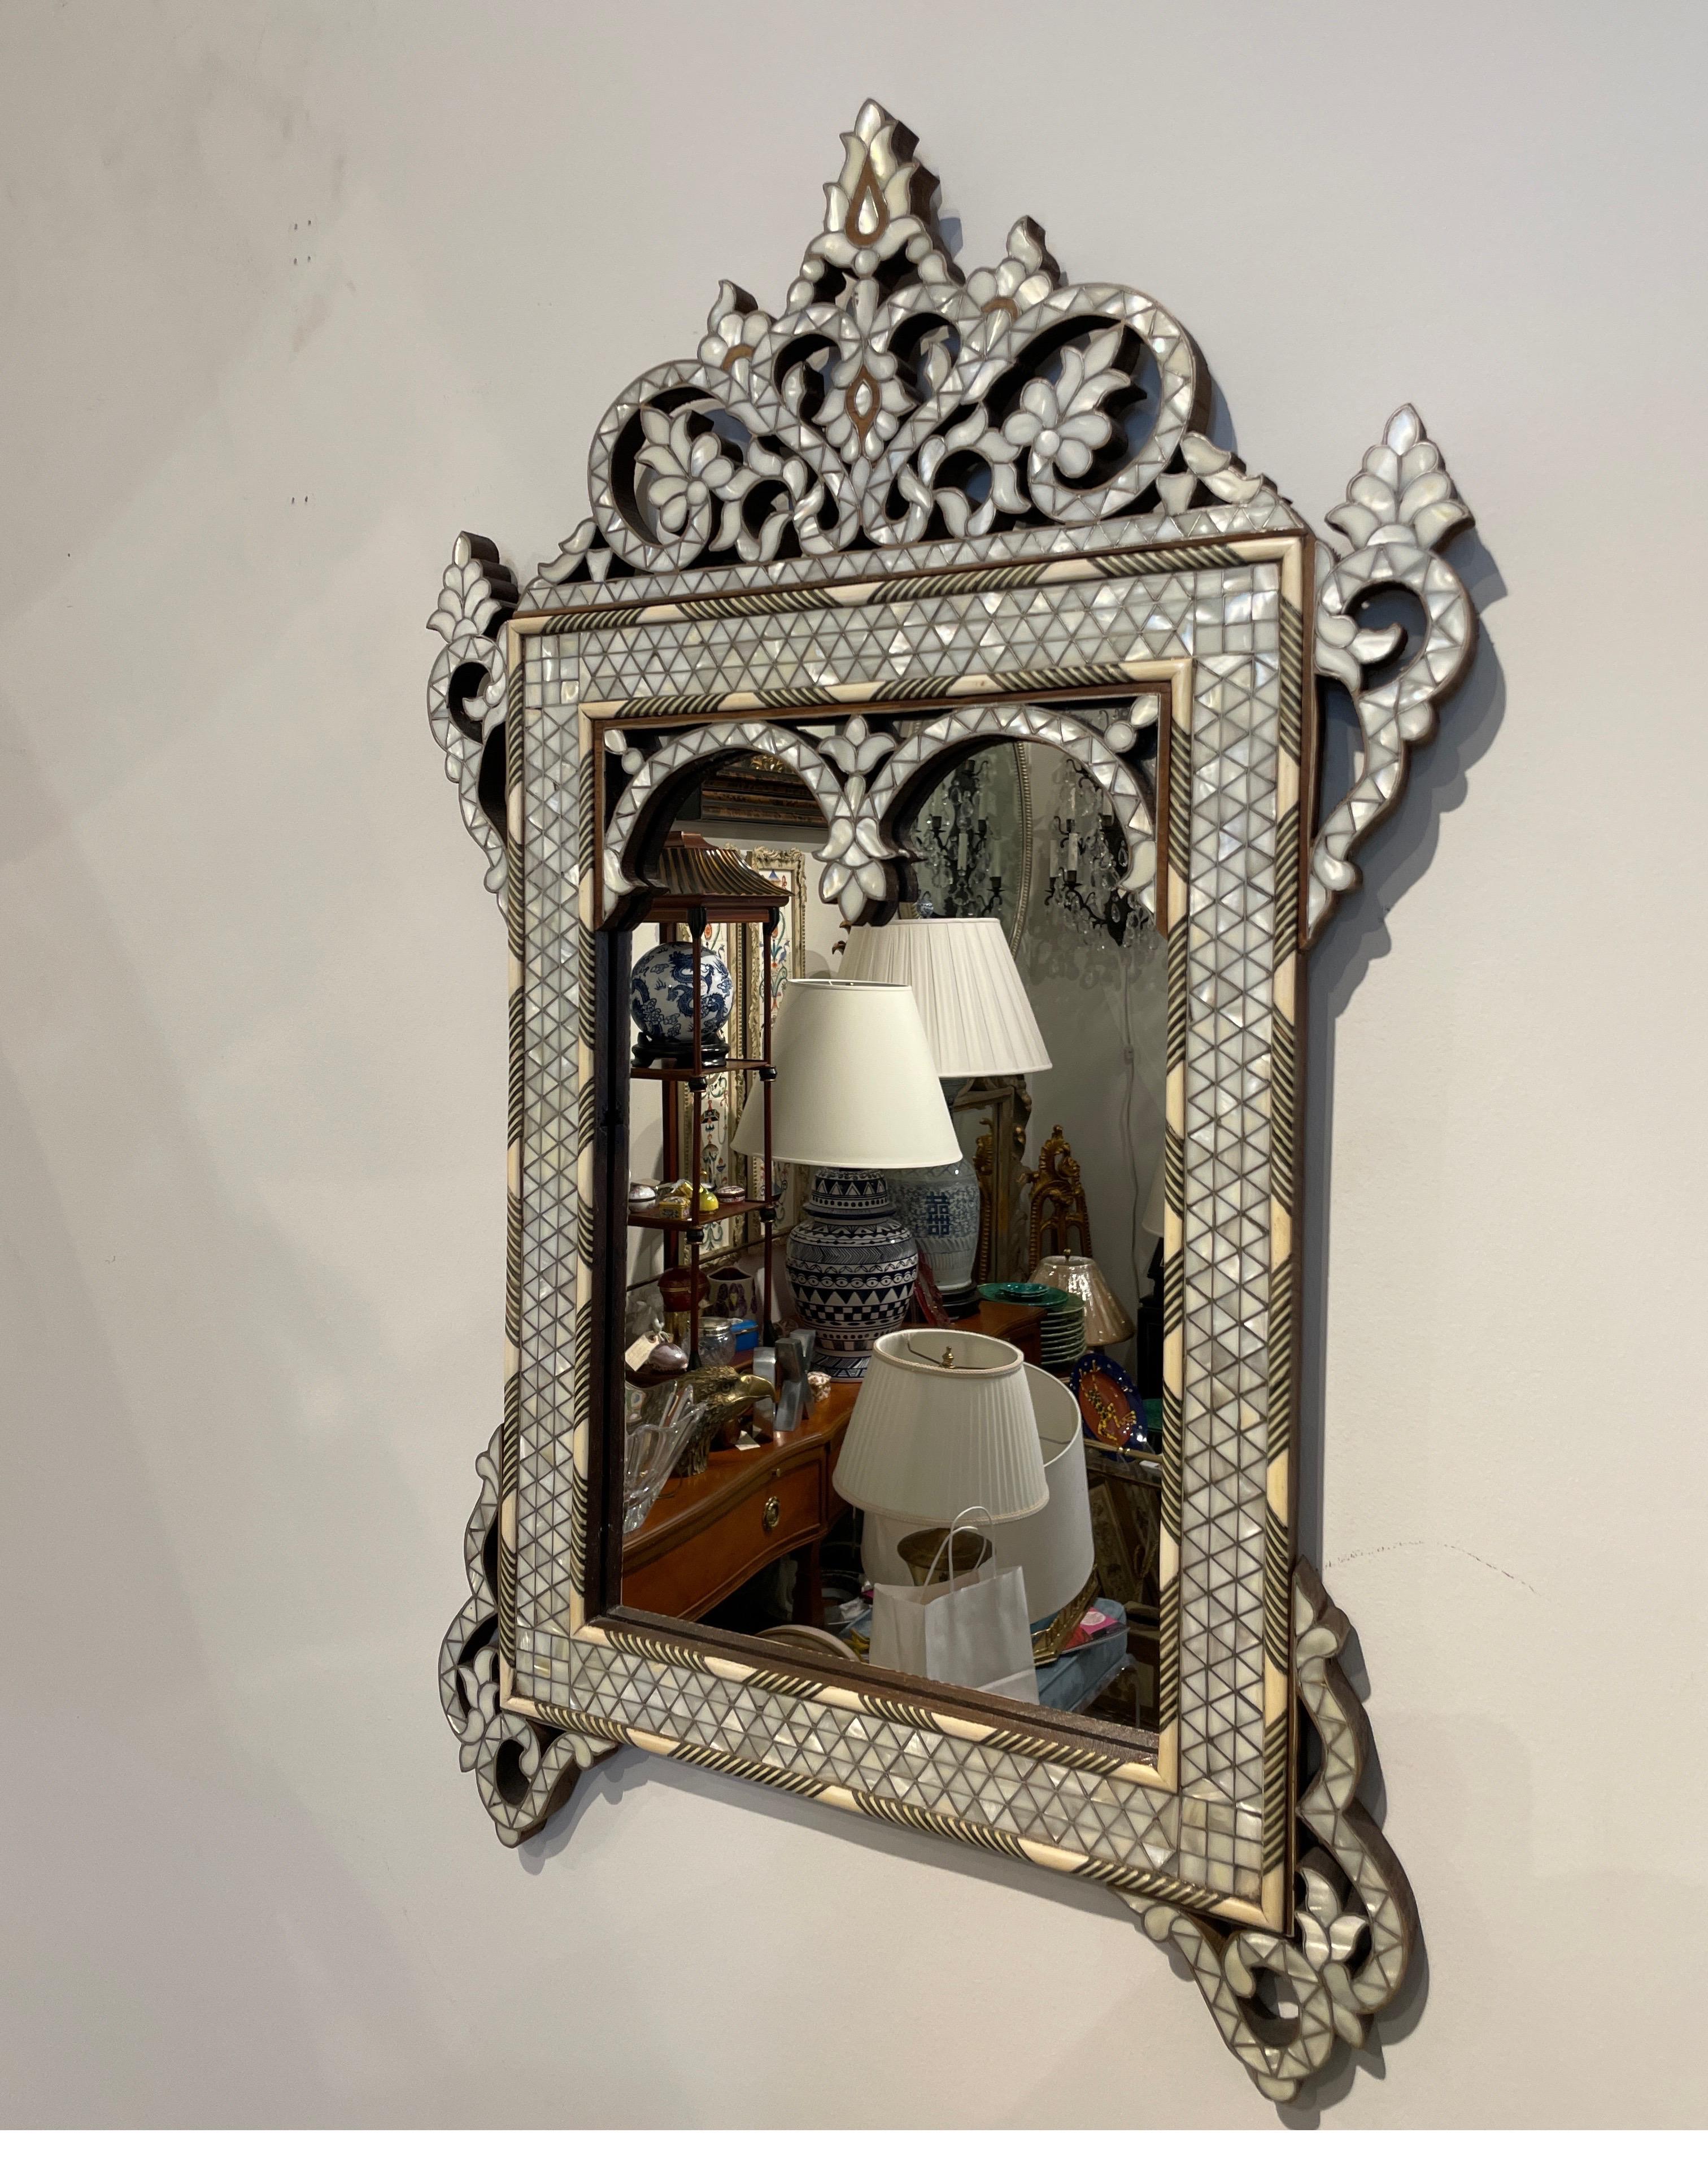 Beautifully detailed mother of pearl & bone inlaid mirror. This elegant mirror with attached pediment & side adornments would look great in a powder room or almost any other place you choose to use it. Very fine quality.